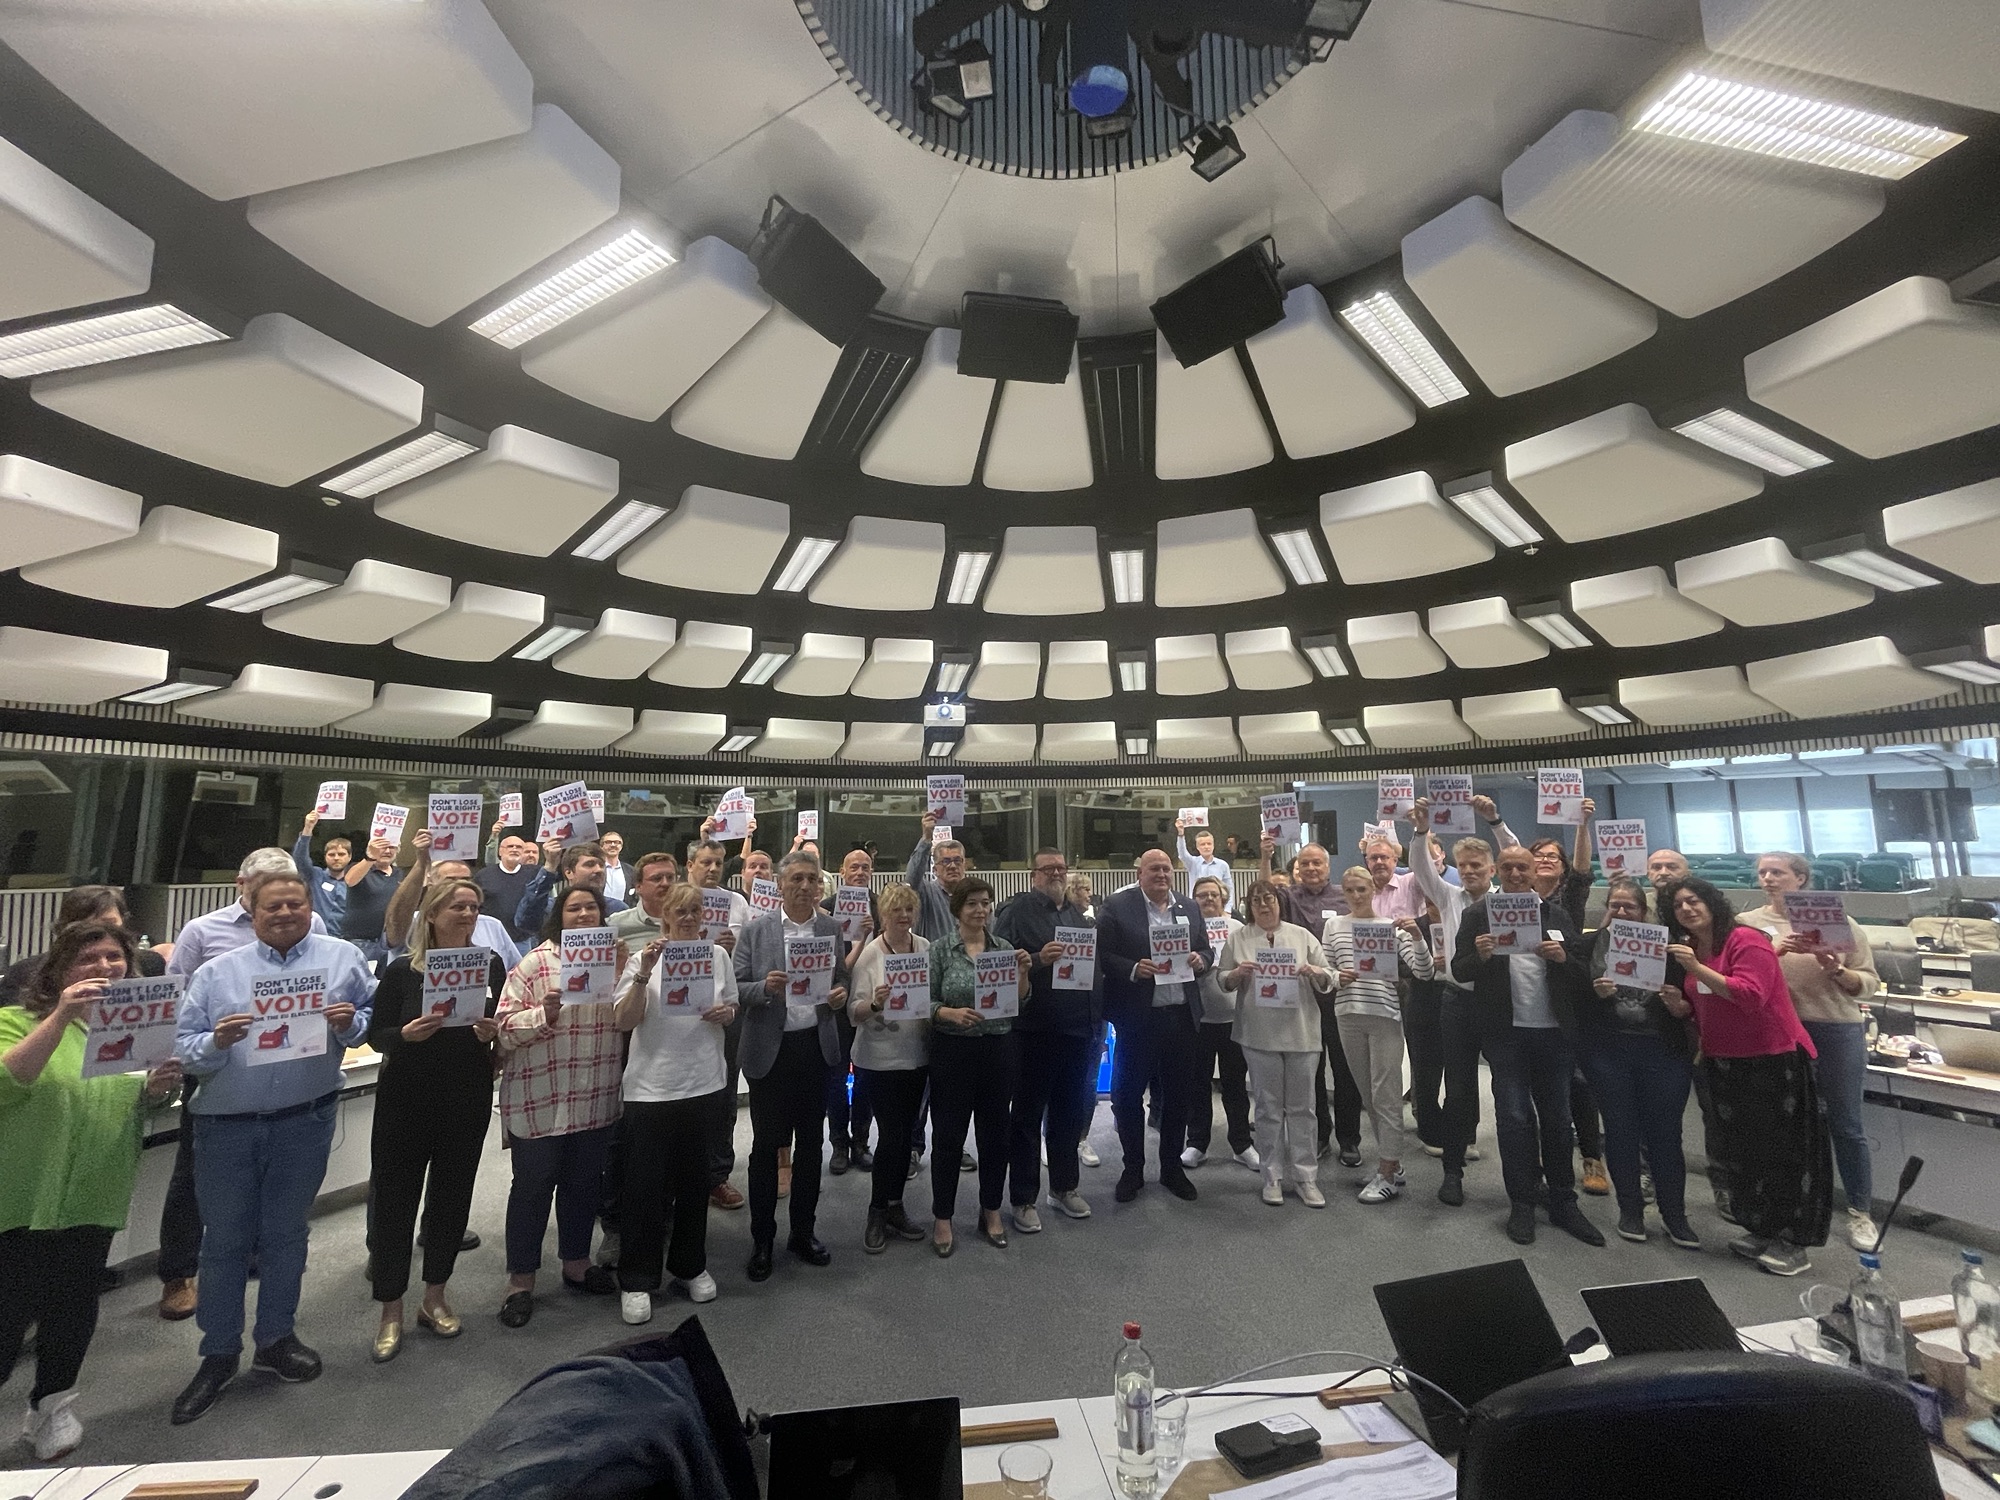 A Bruxelles l’esecutivo dell’Etf – European Transport Workers’ Federation